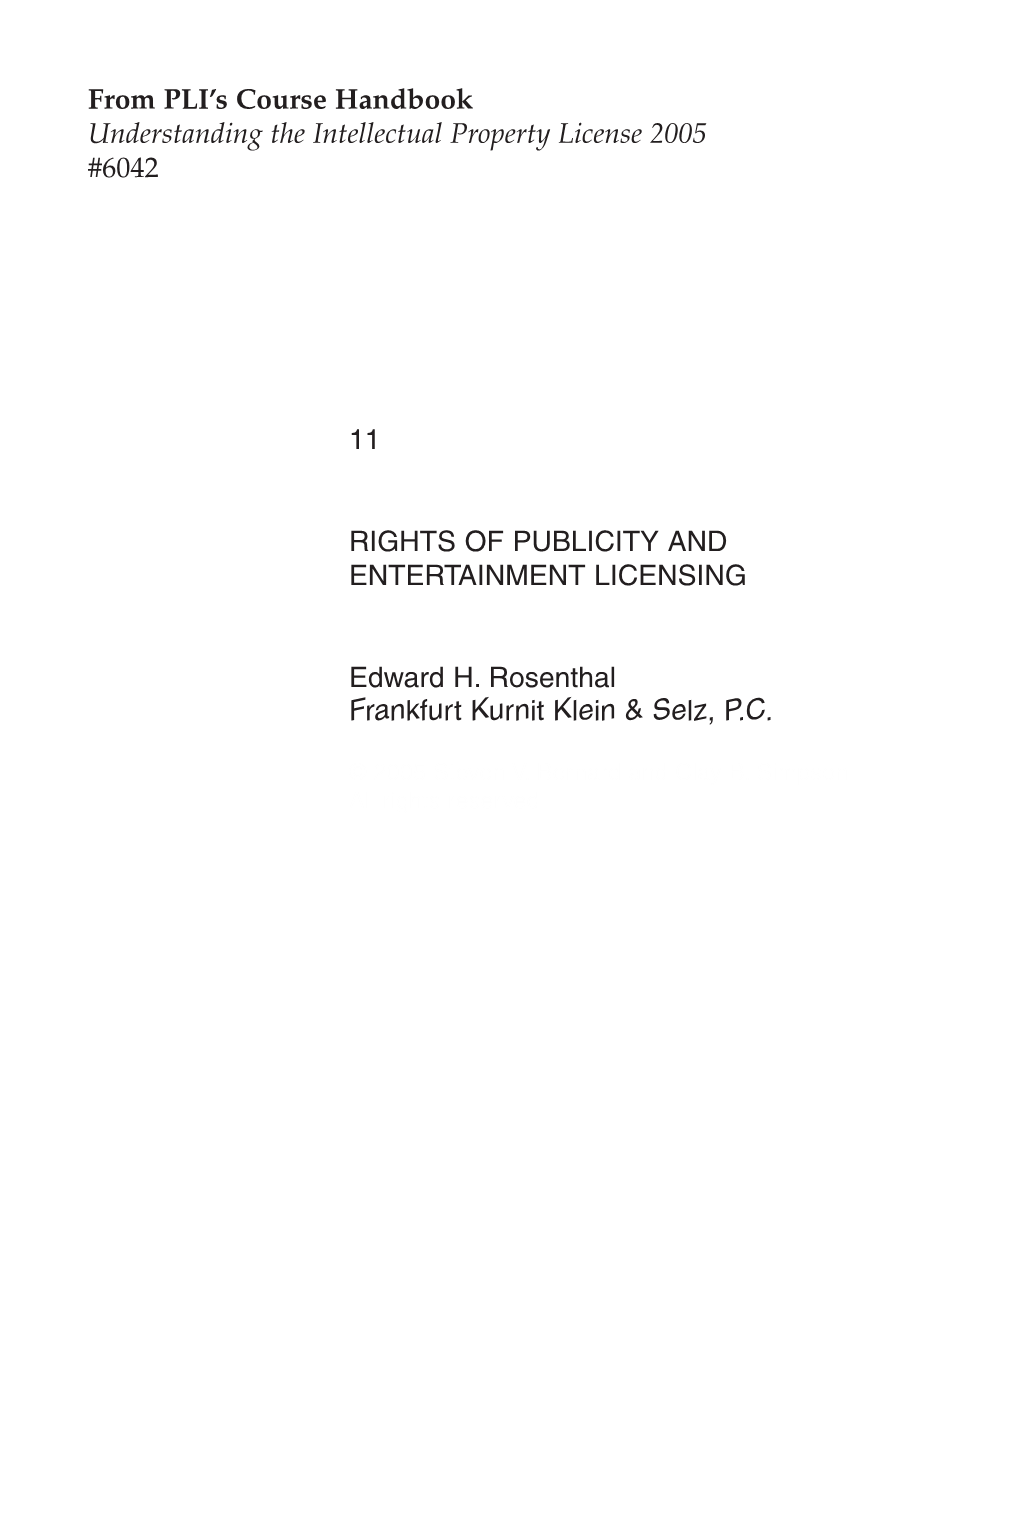 Rights of Publicity and Entertainment Licensing